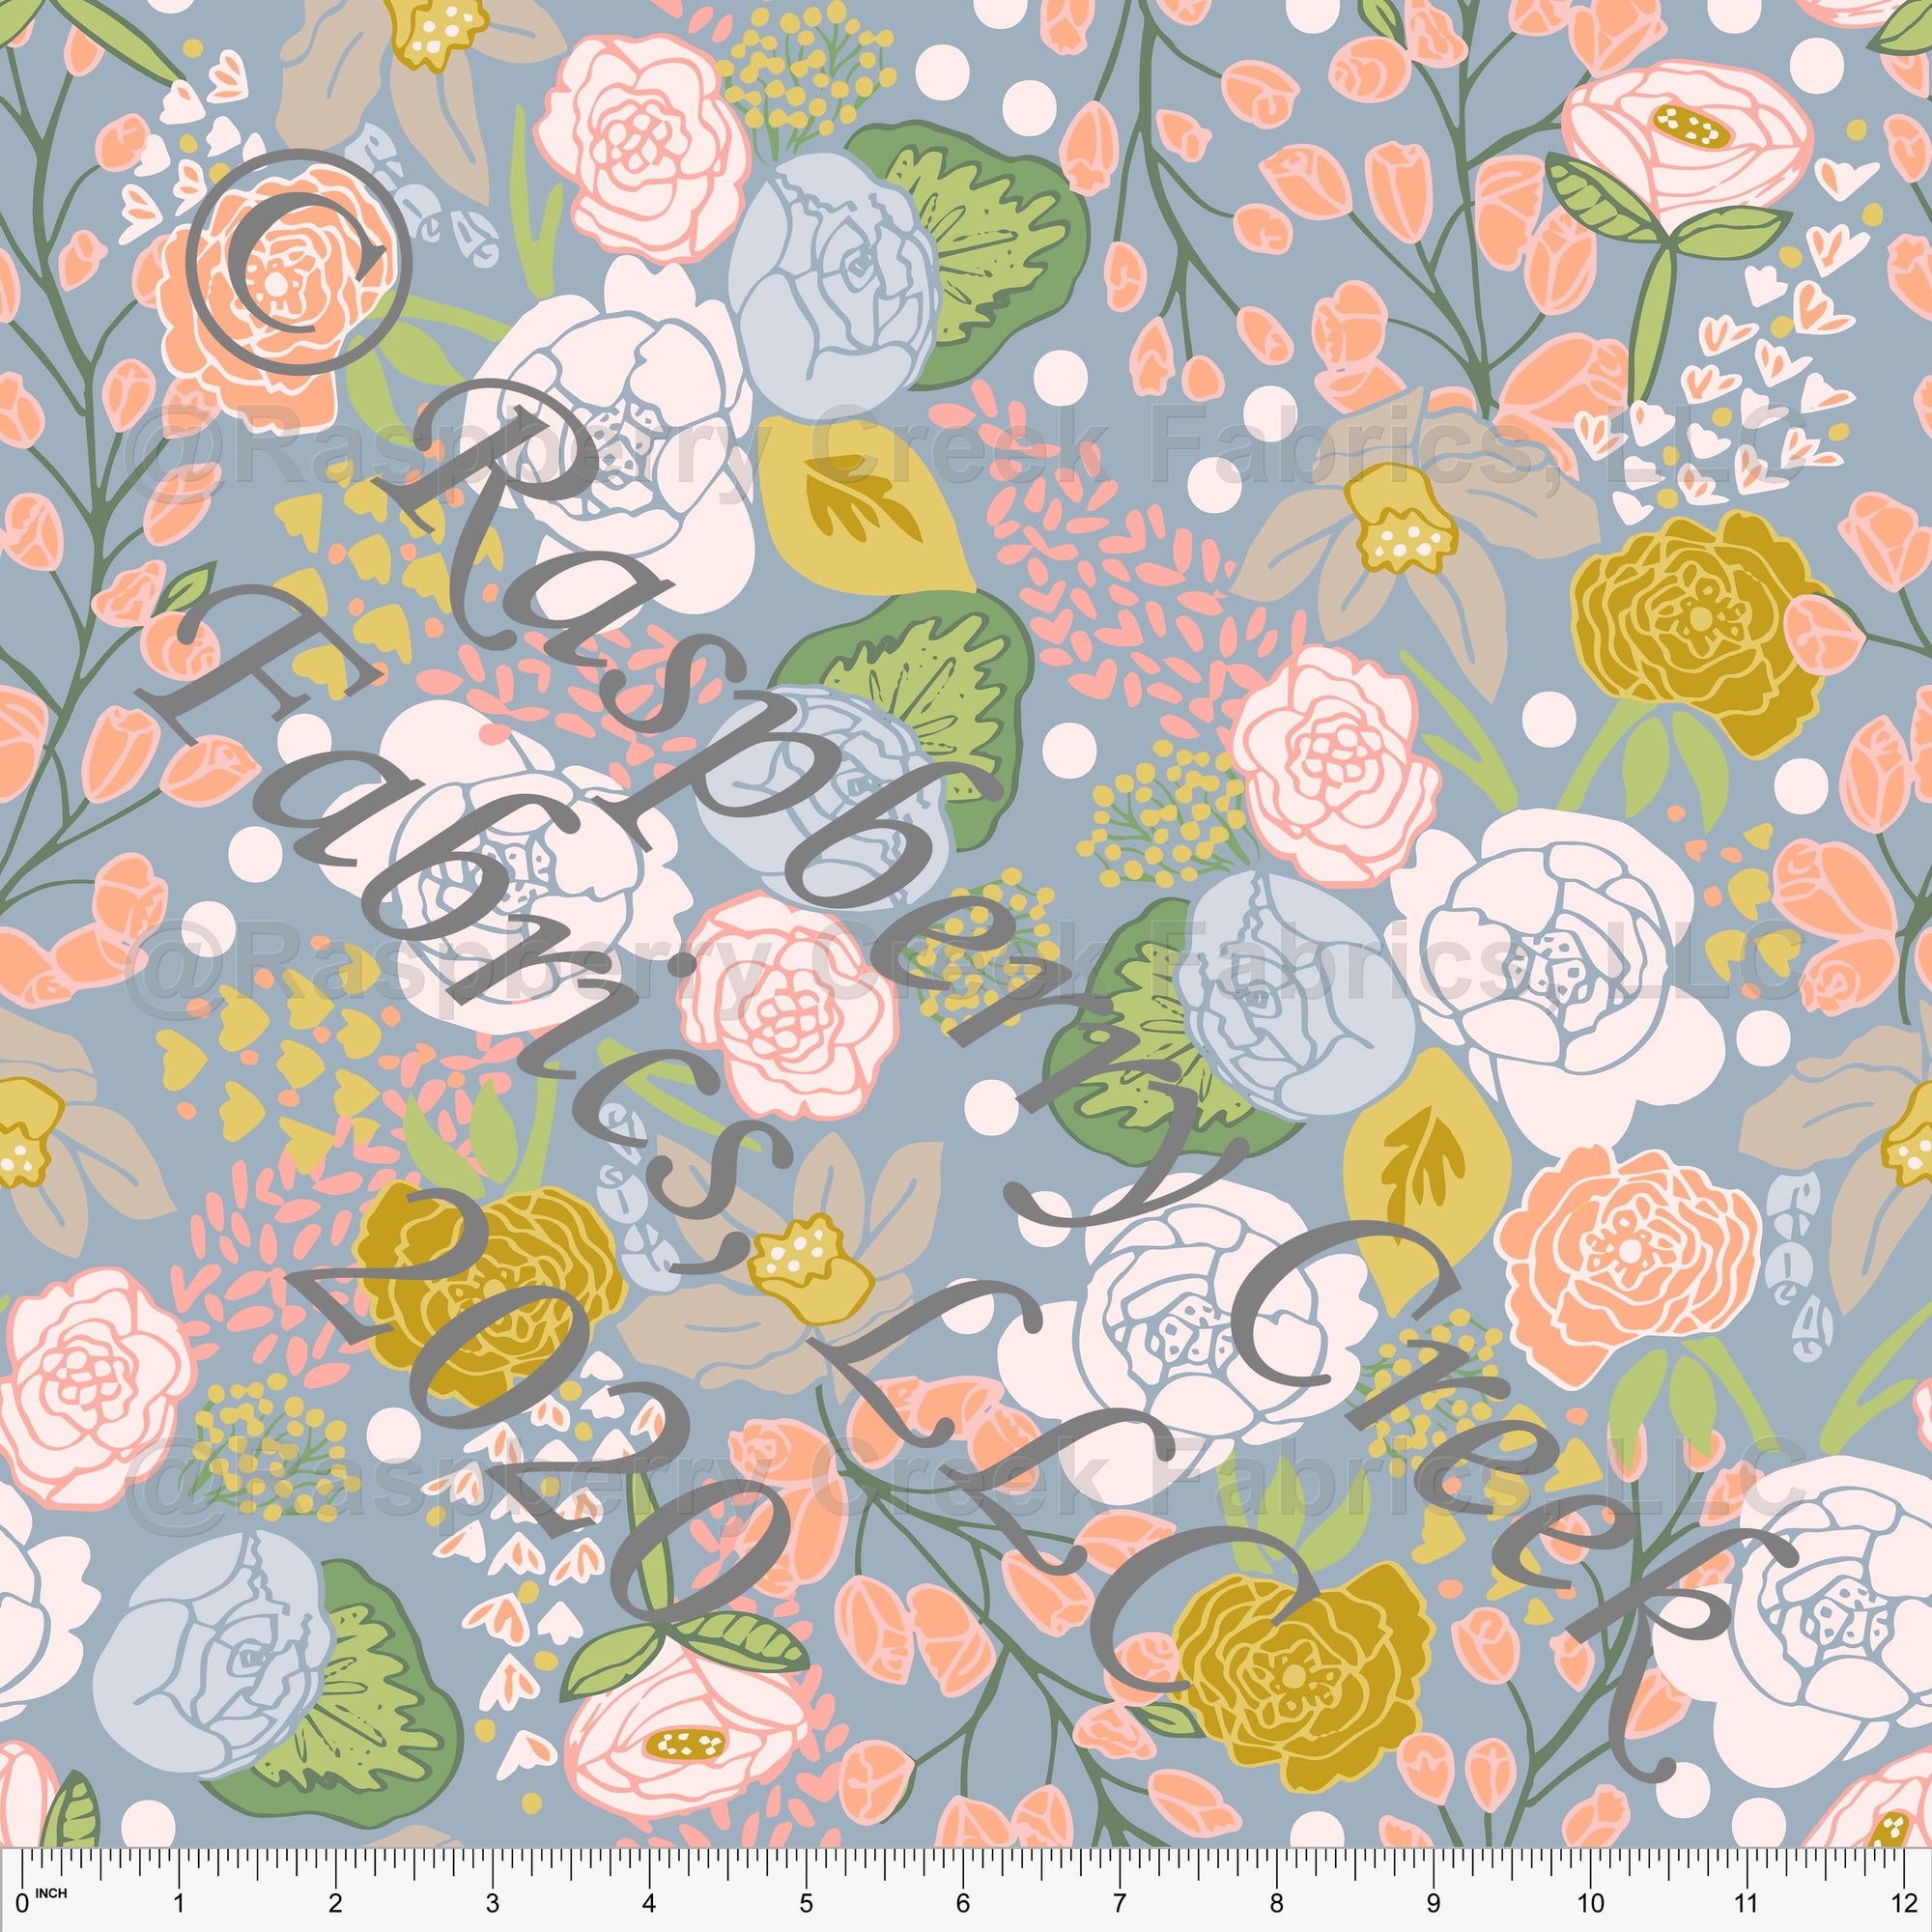 Dusty Blue Coral Mustard Pink and Green Floral Print Stretch Crepe Fabric, By Kim Henrie for CLUB Fabrics Fabric, Raspberry Creek Fabrics, watermarked